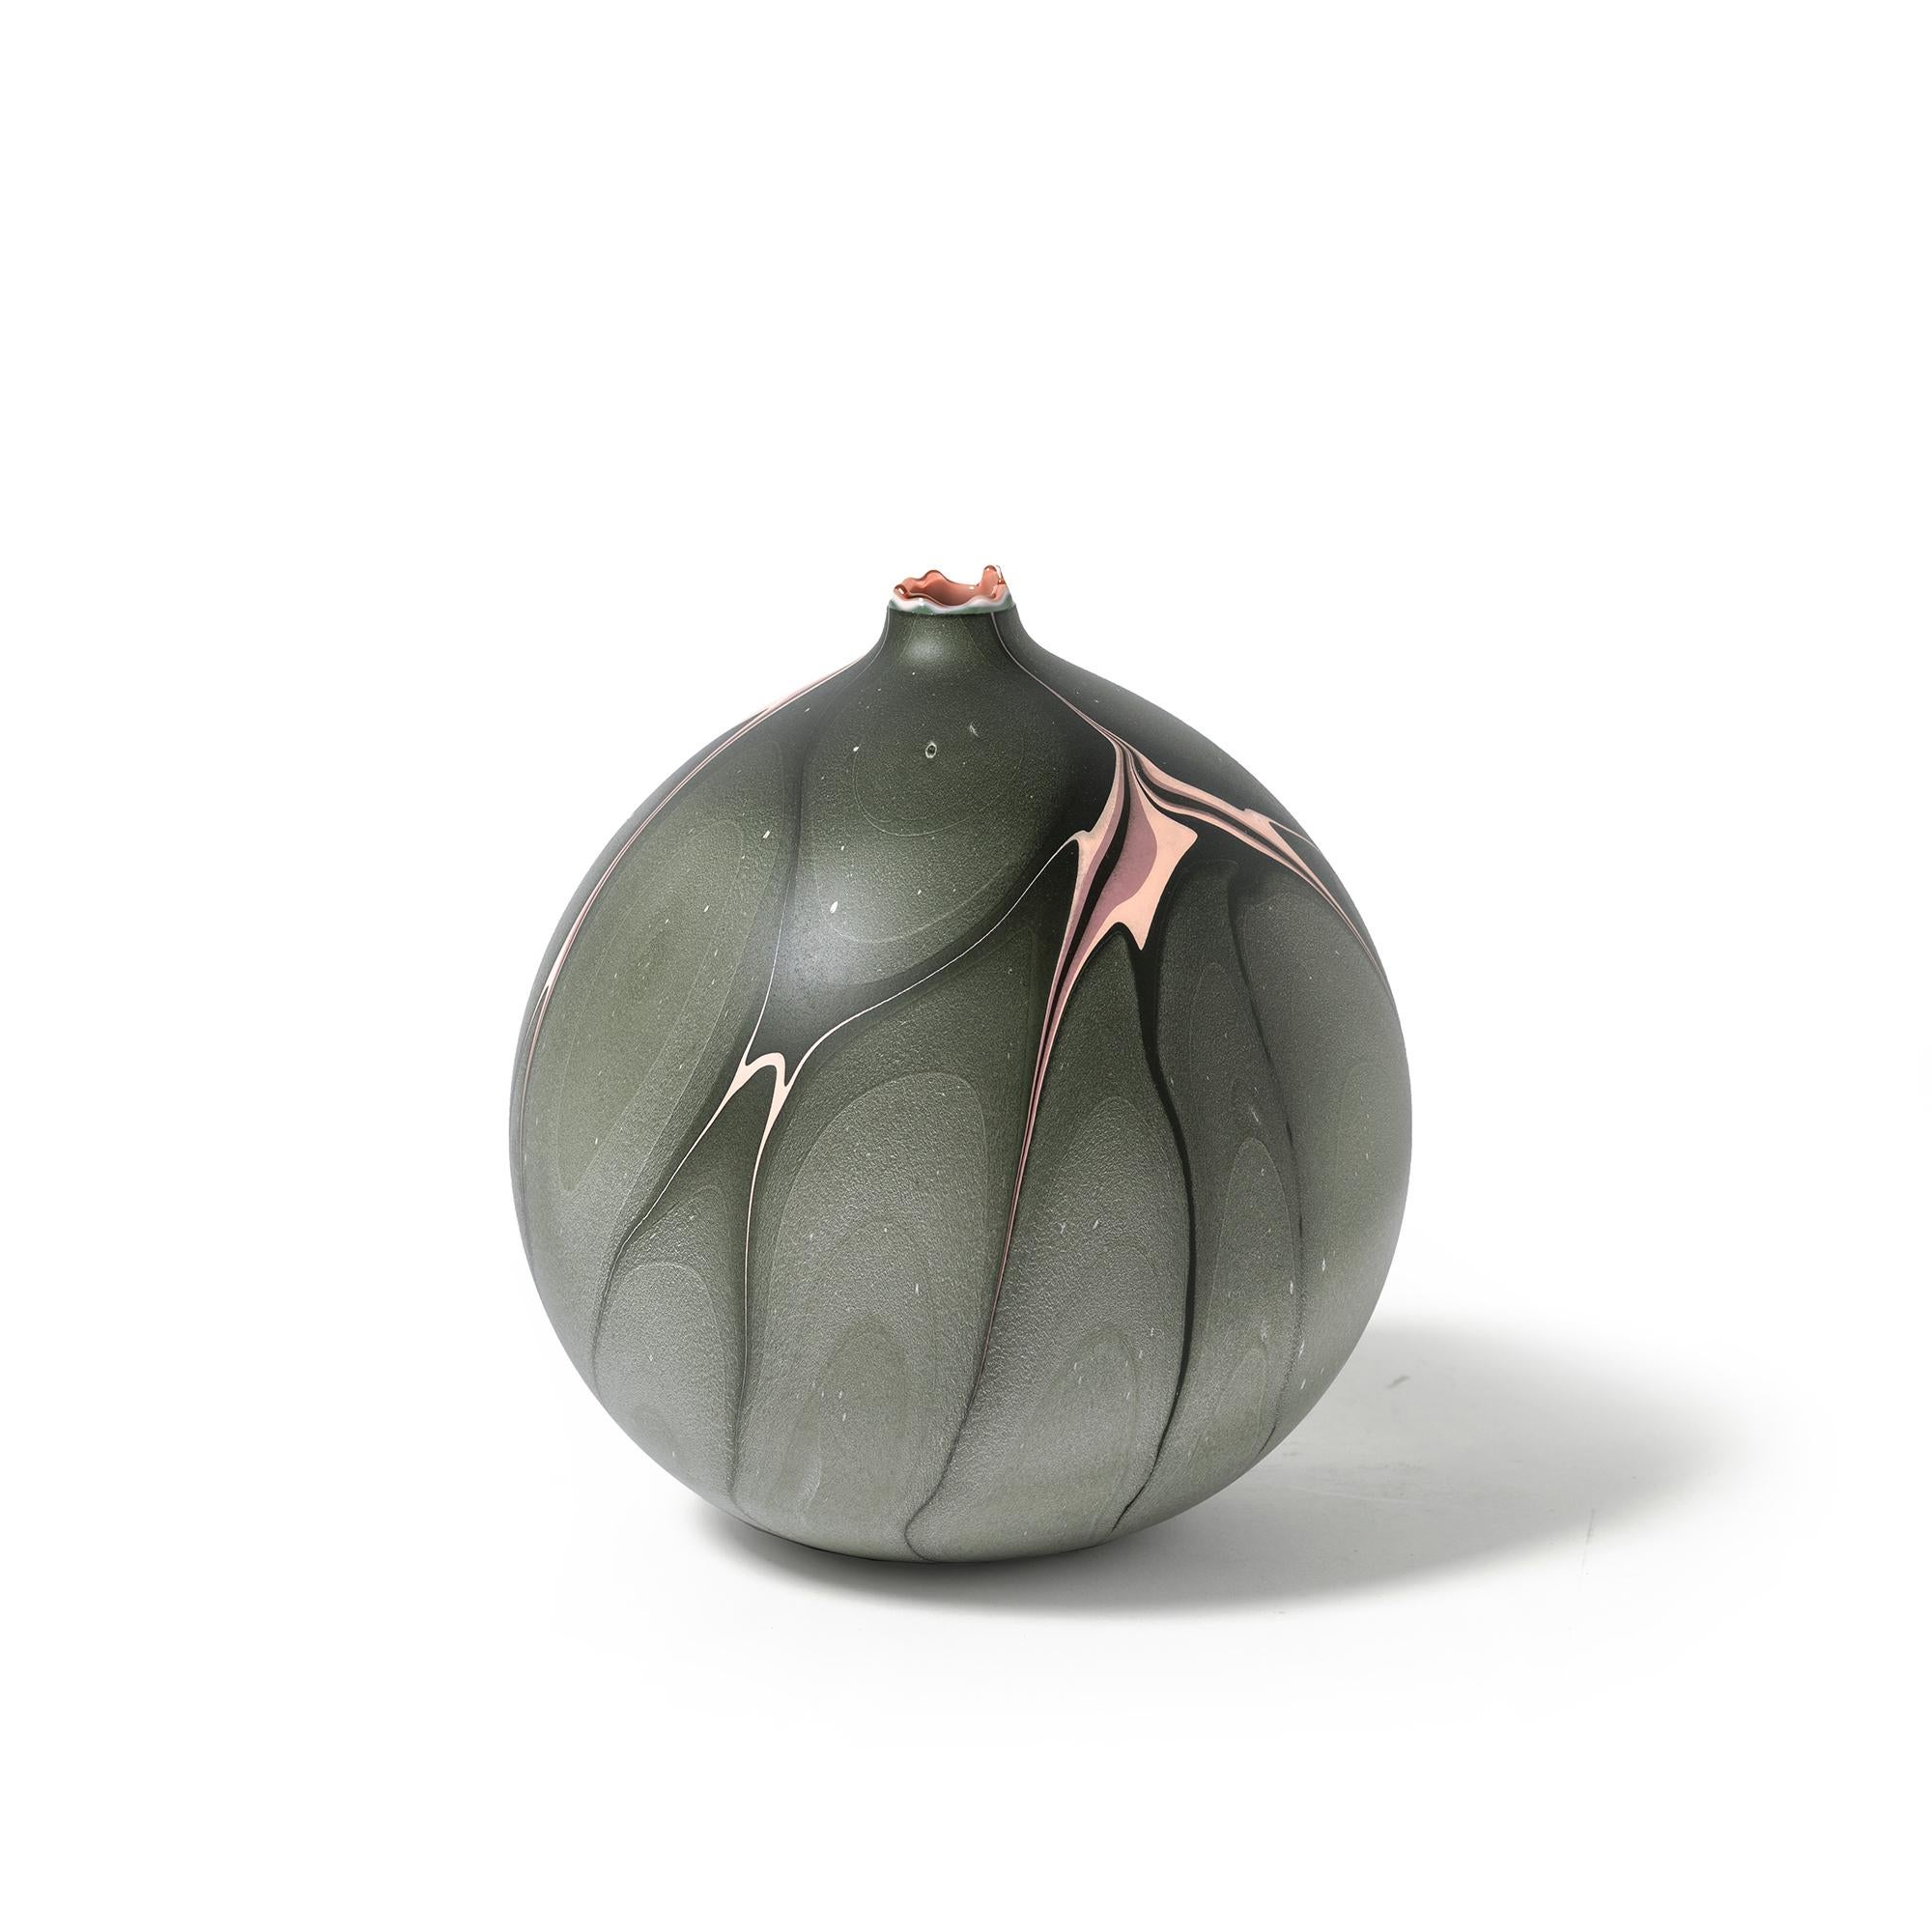 Manifested by Los Angeles based sculptor, Elyse Graham, the Amazon Vase is 9" h x 8"w x 8"d and is part of her Hydro Collection. This vessel features a hand-dyed marbled design of olive green with lavendar and lilac on the surface and a soft pink